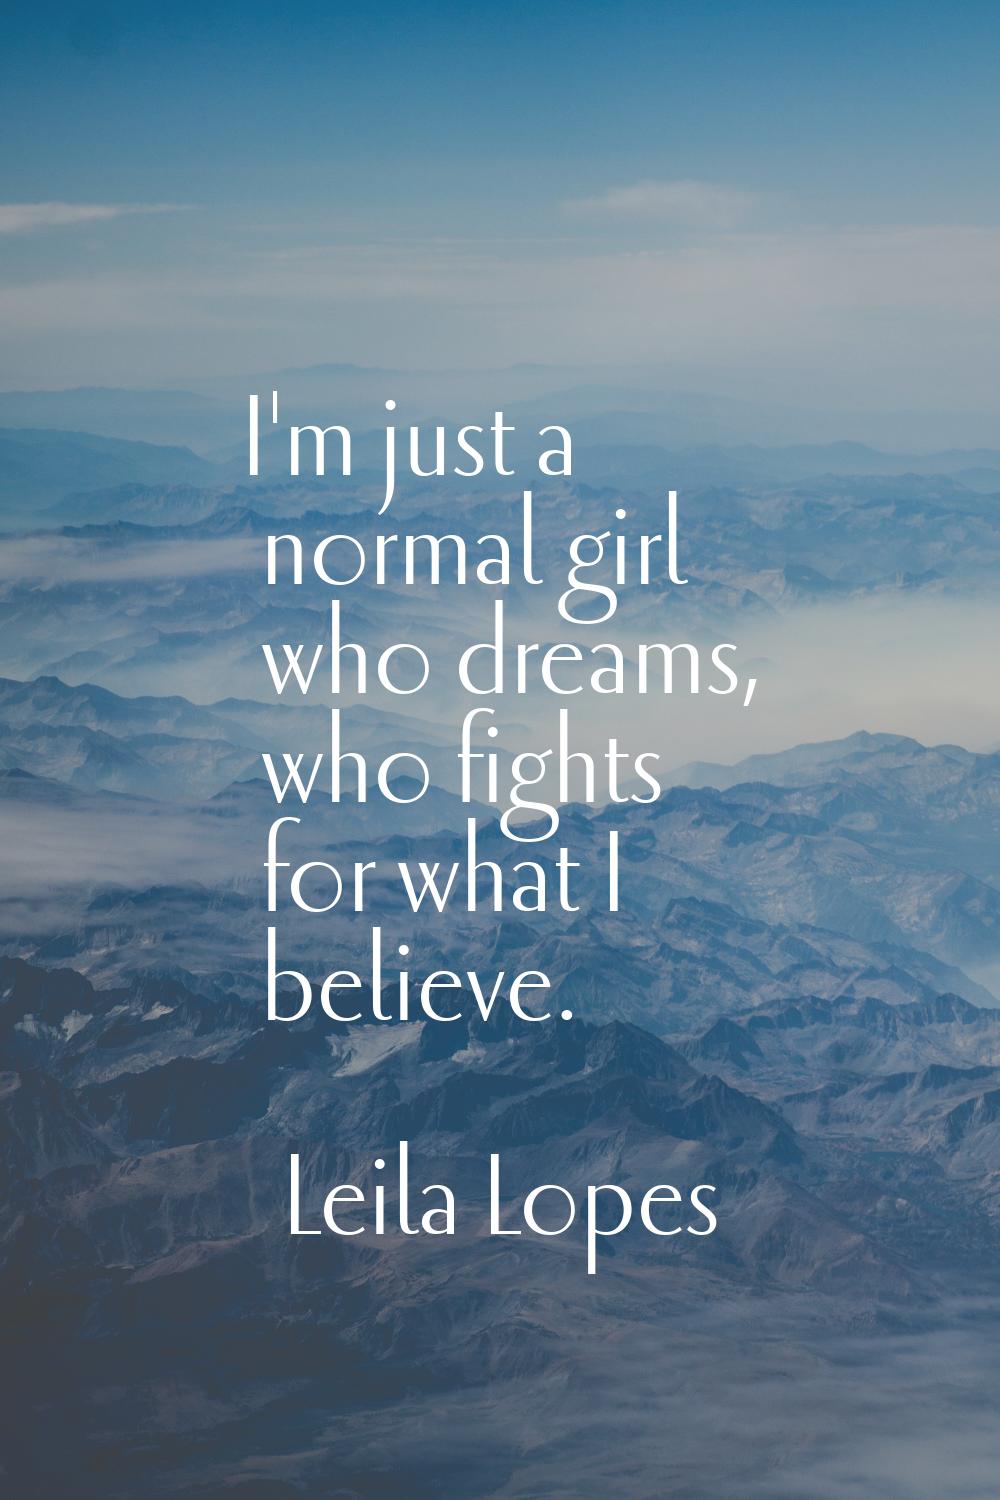 I'm just a normal girl who dreams, who fights for what I believe.